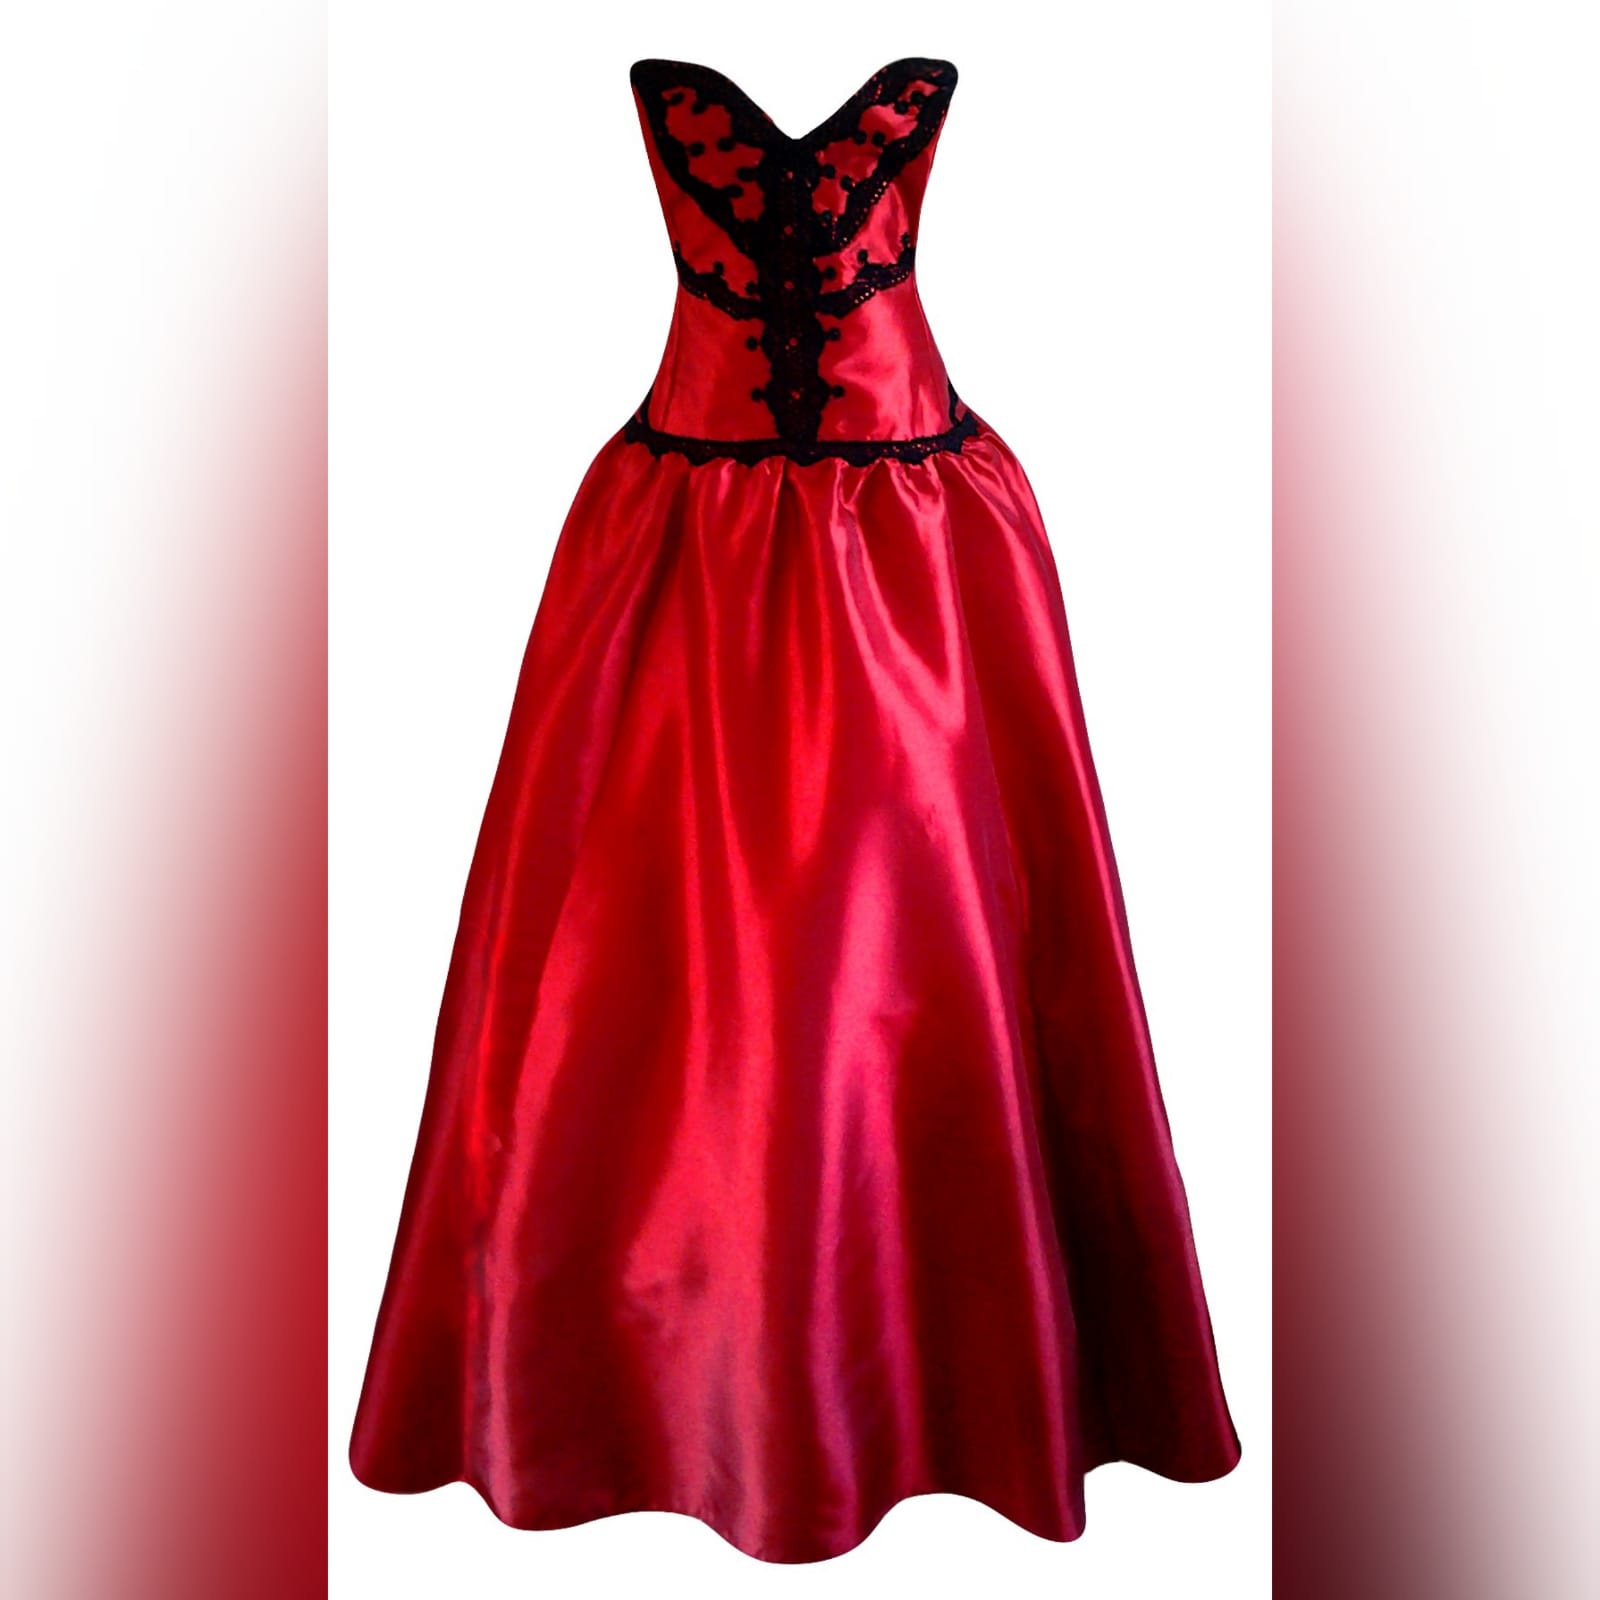 Red and black boob tube prom dress 2 red and black boob tube prom dress, with bodice detailed with black lace embellishments.